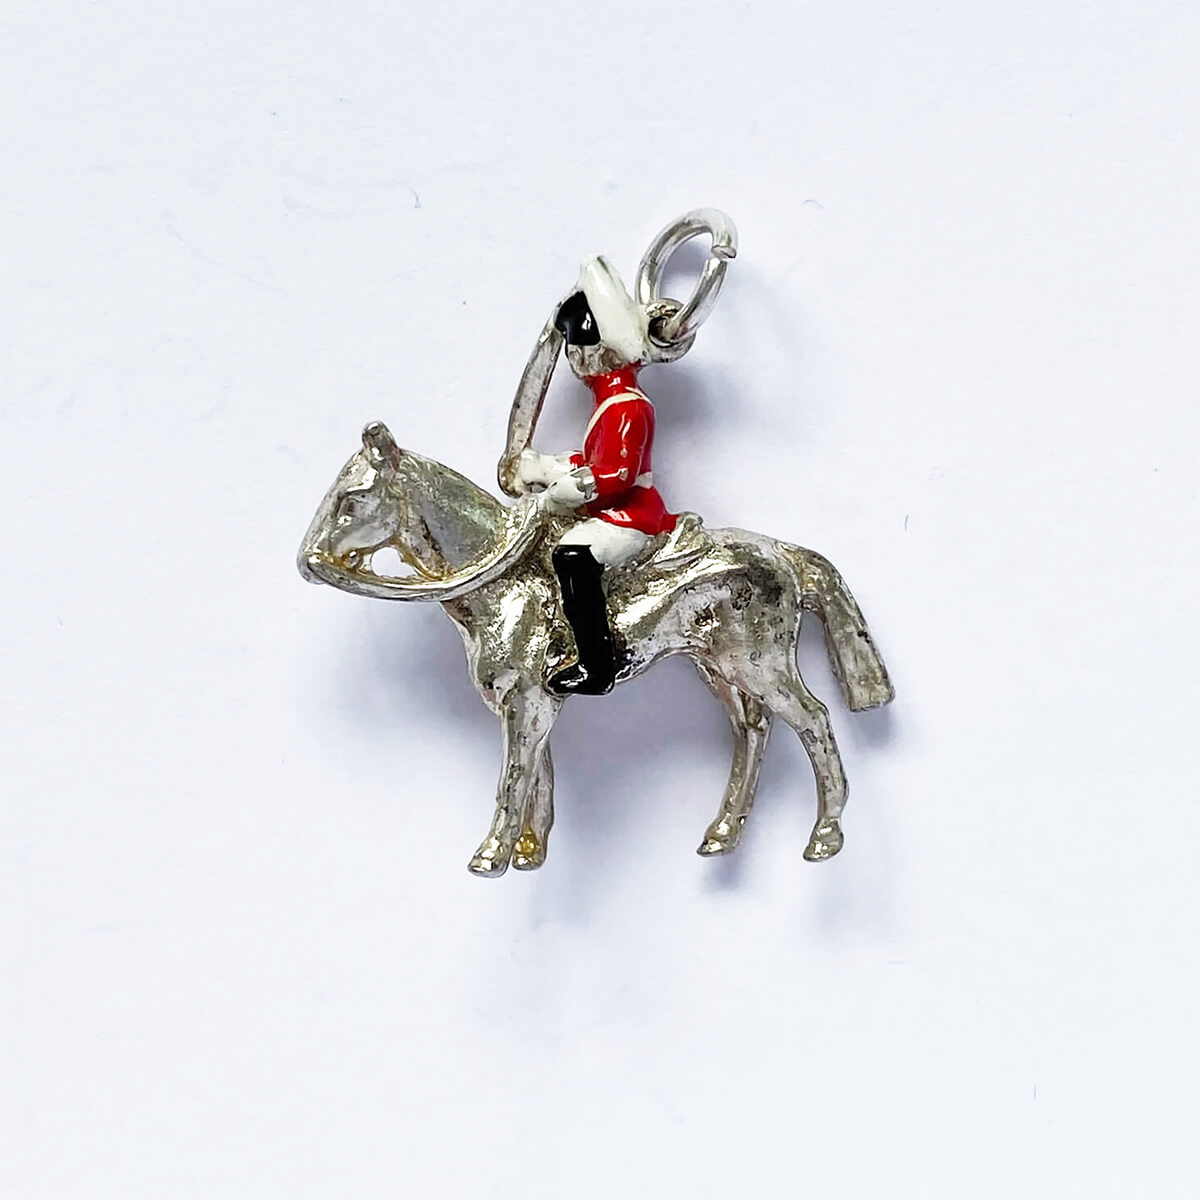 Vintage Queen's soldier on horse silver enamel English pendant from Charmarama Charms